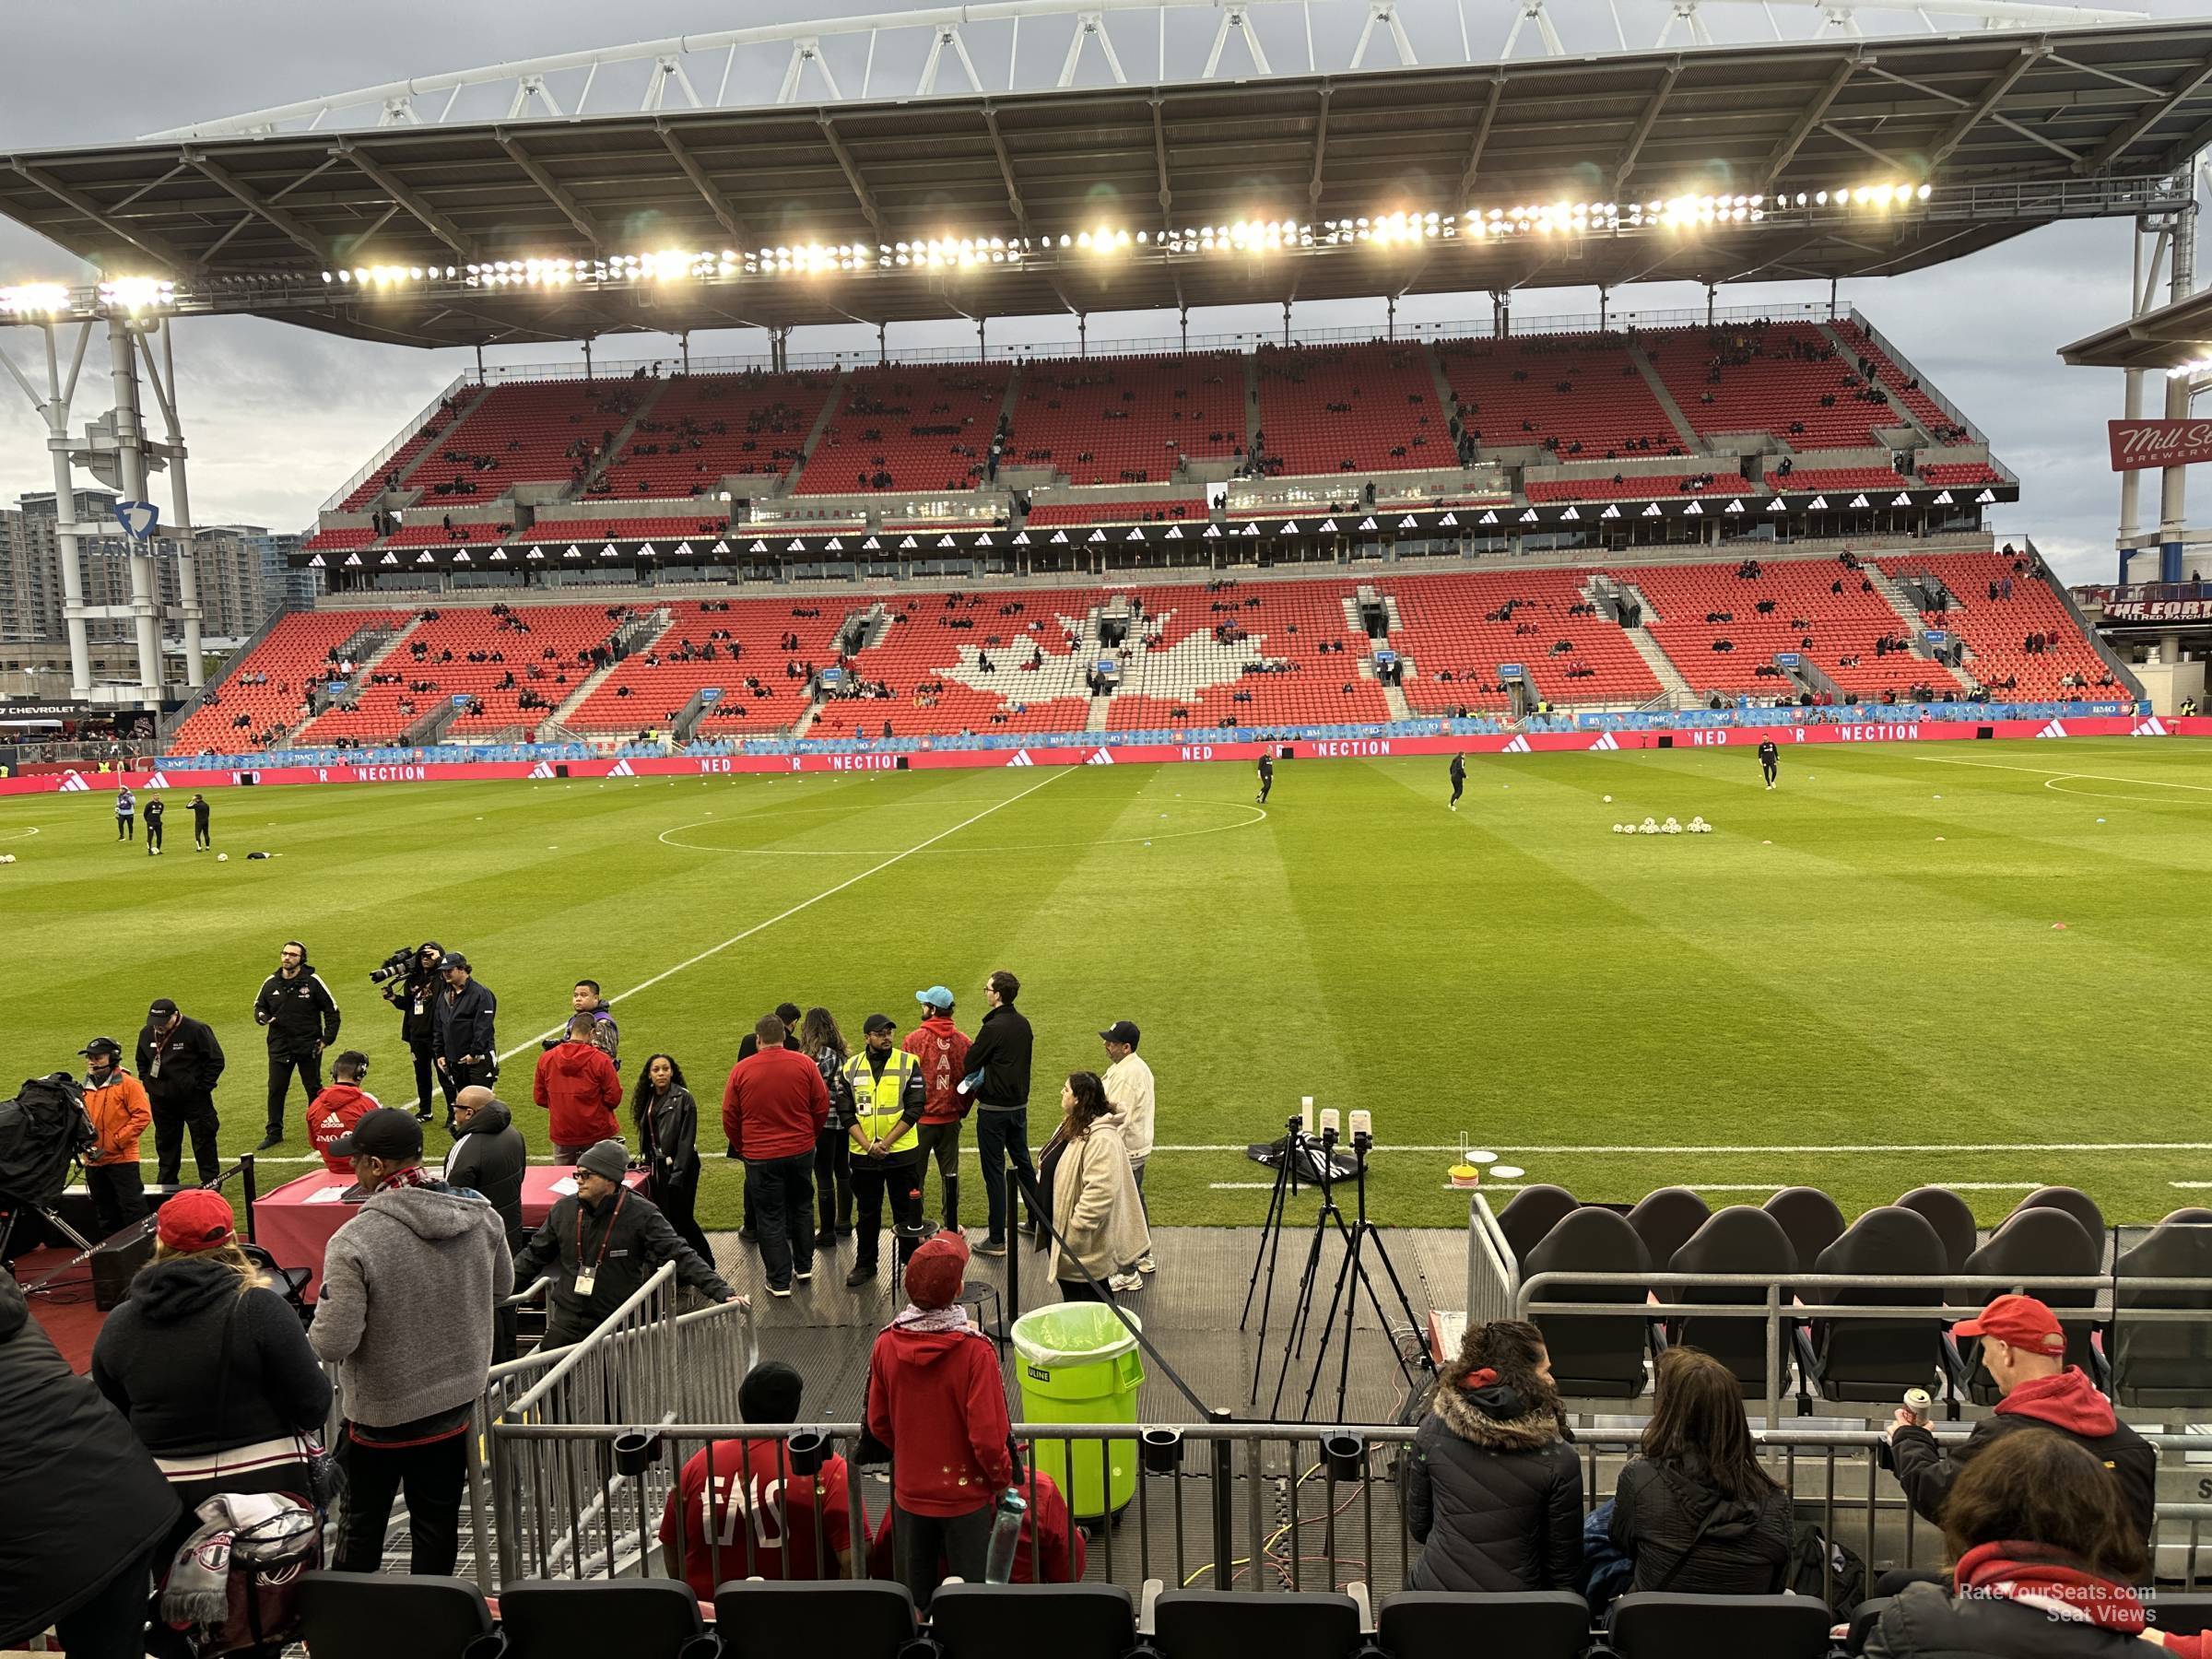 section 123, row 6 seat view  - bmo field